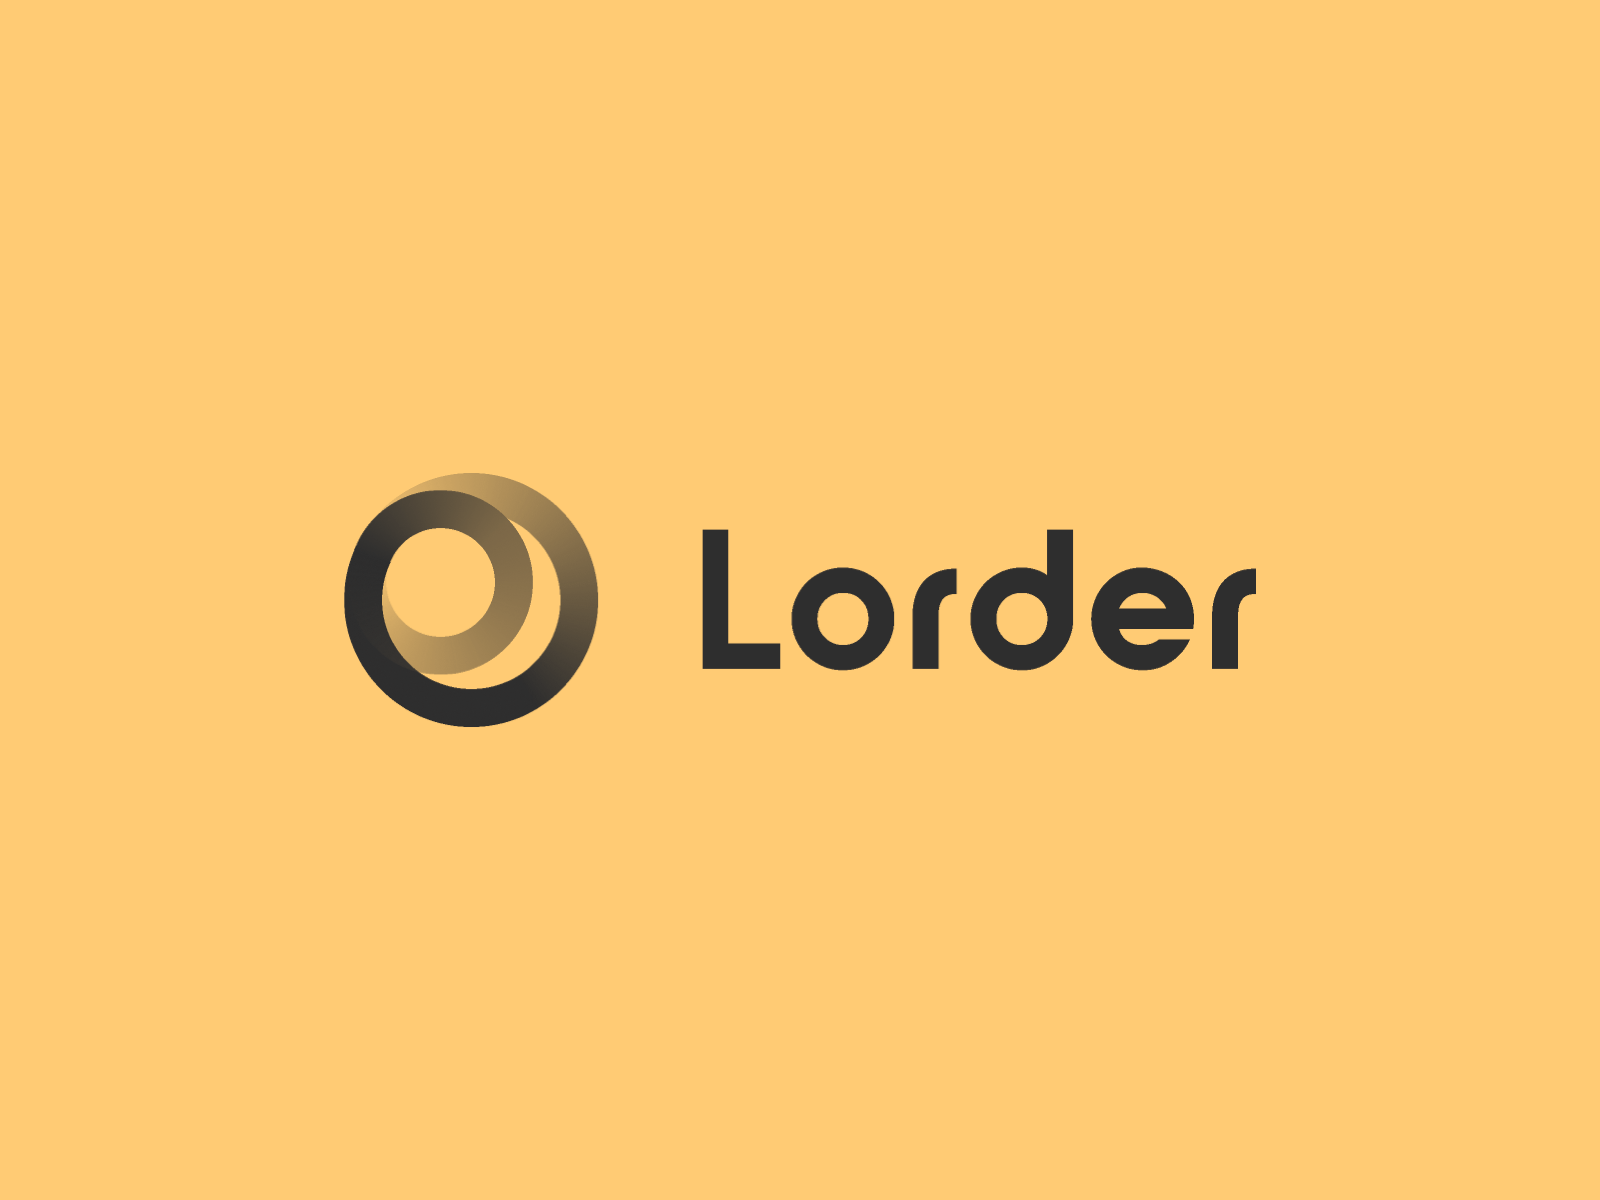 Rebranding and new logo for Lorder